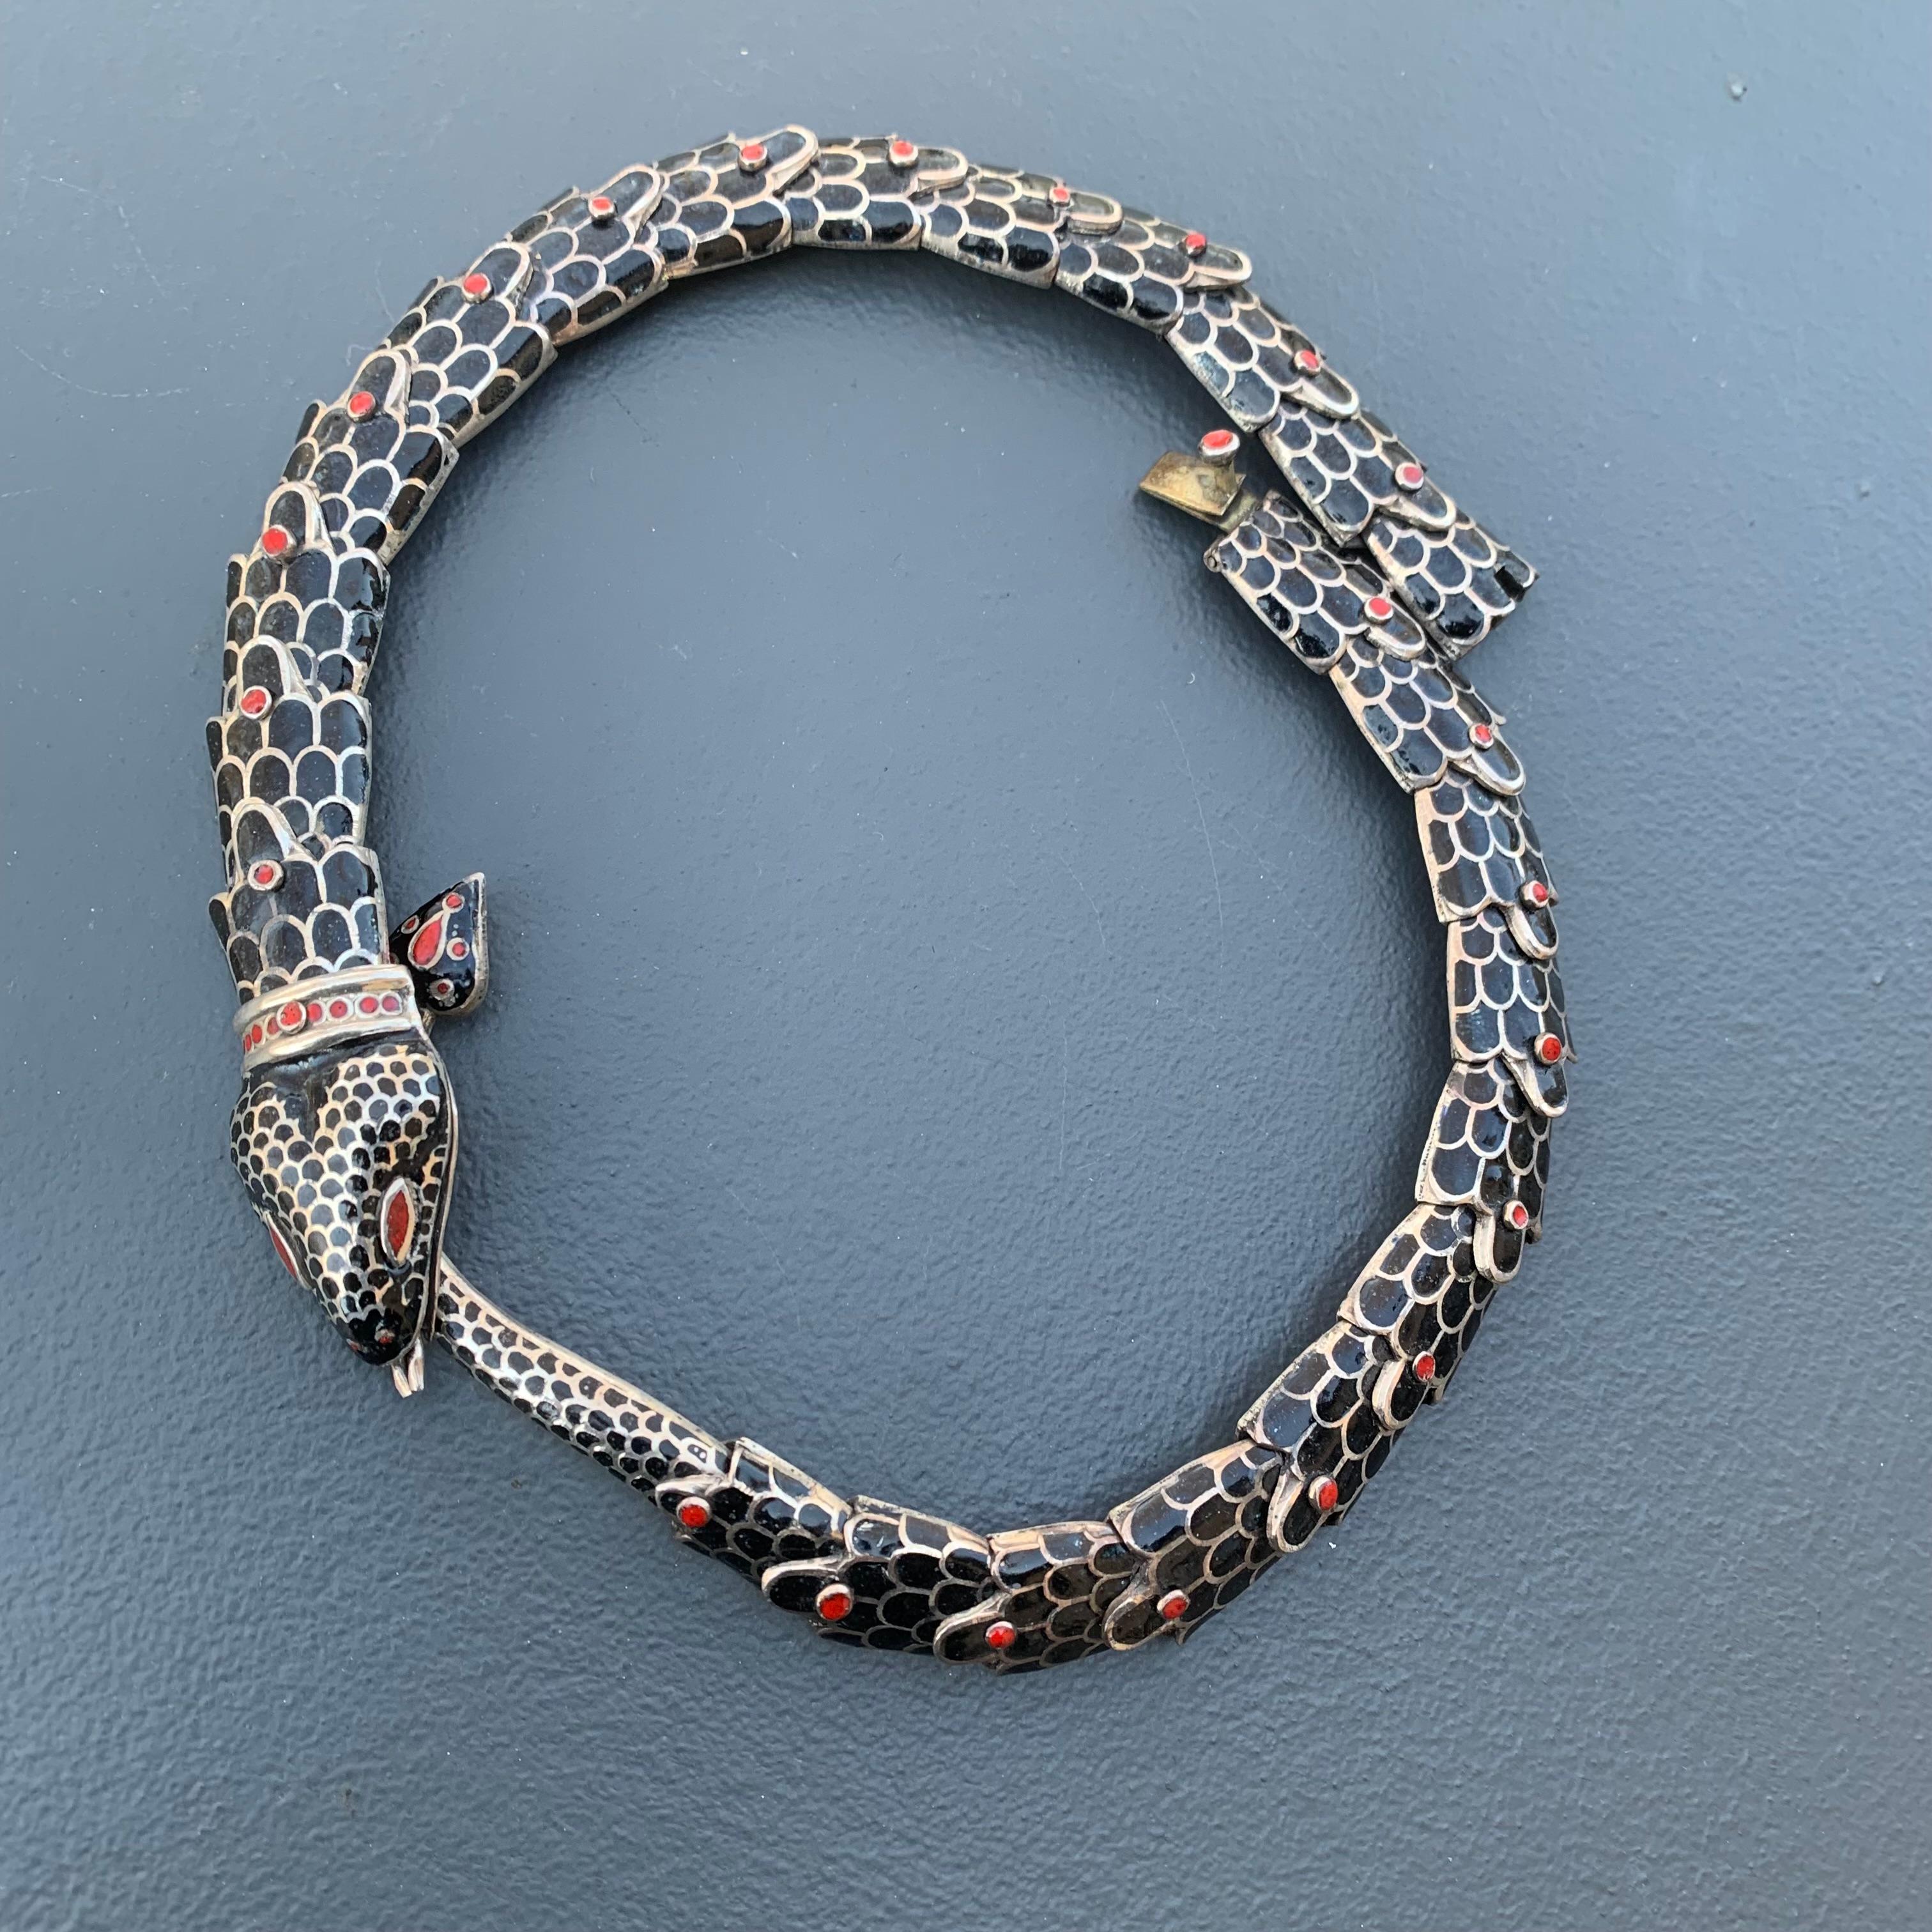 Exquiste Vintage Mexican /Mexico sterling  silver, enameled scales choker  necklace  featuring  articulated enameled links snake holding /eating its tail . Necklace ends with hidden tongue and box clasp  
Marked 925 Mexico with faded makers mark 